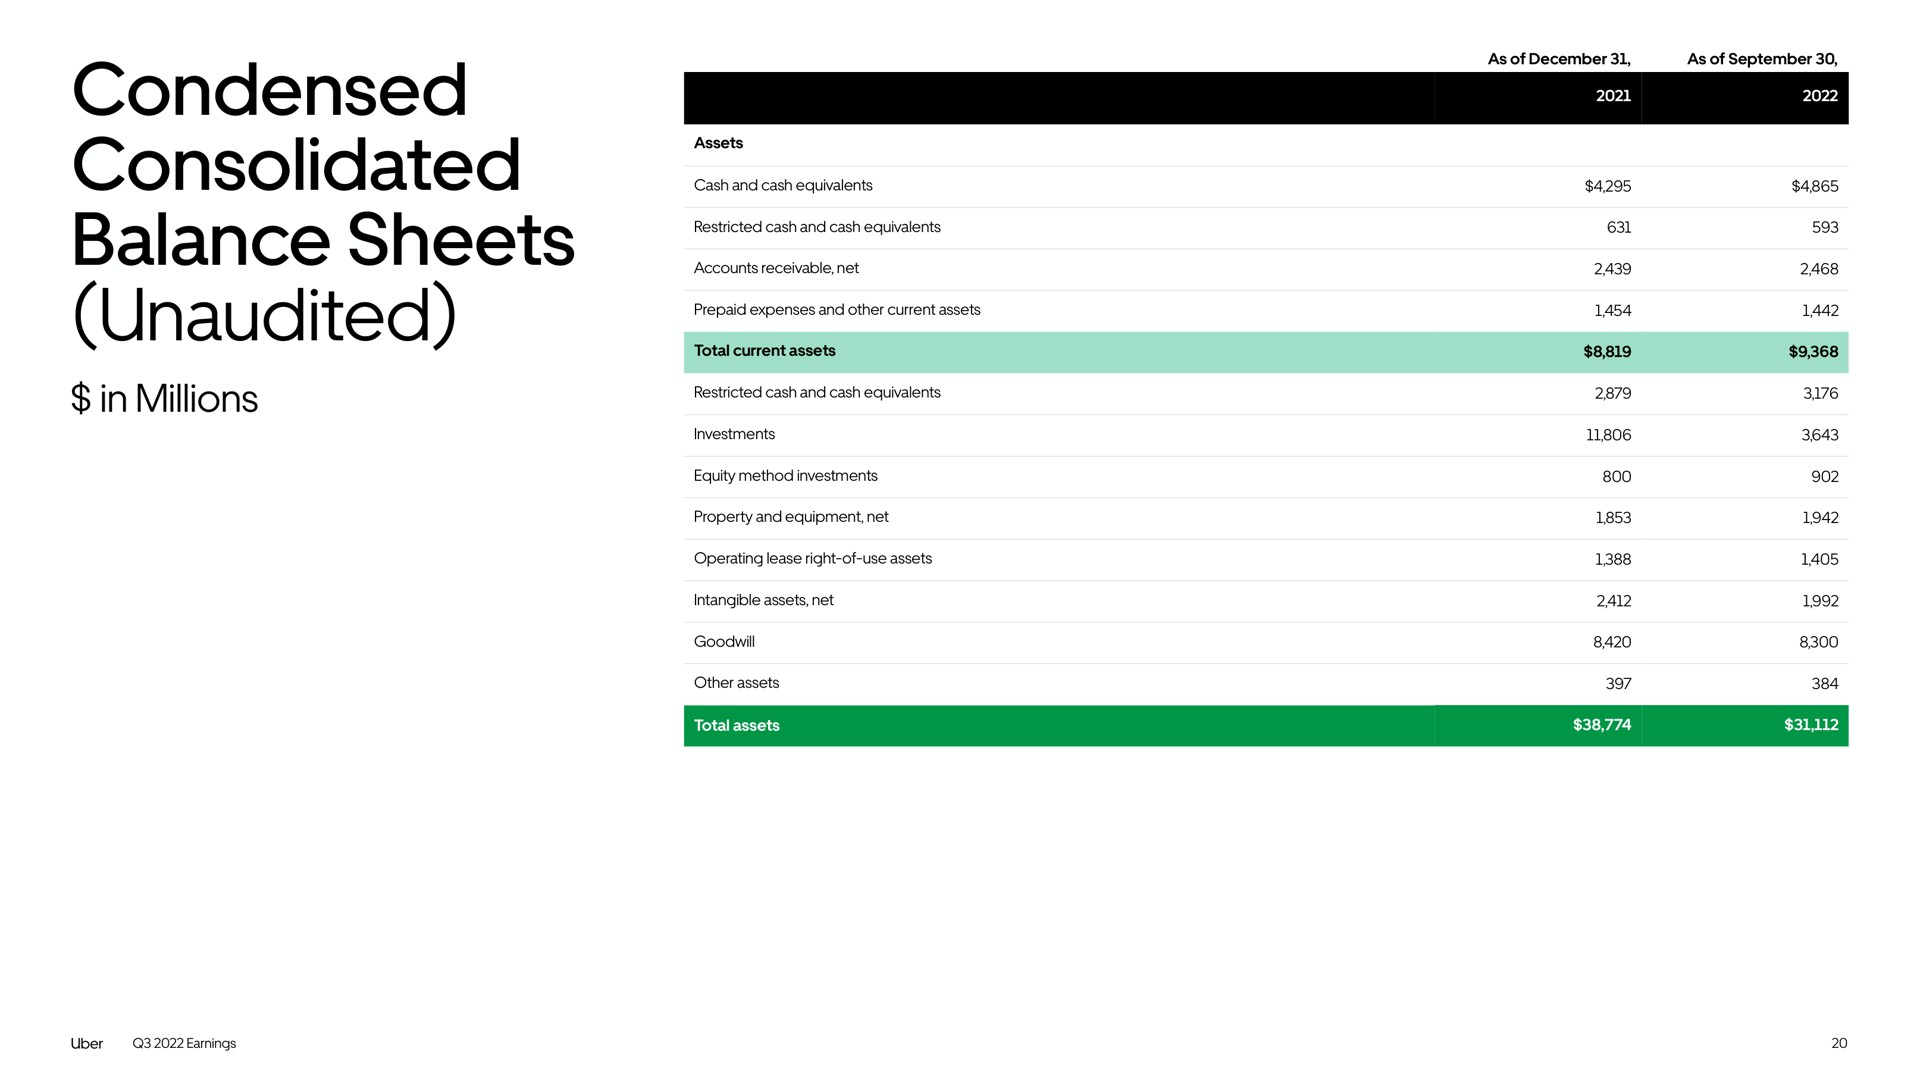 condensed consolidated balance sheets unaudited | Uber